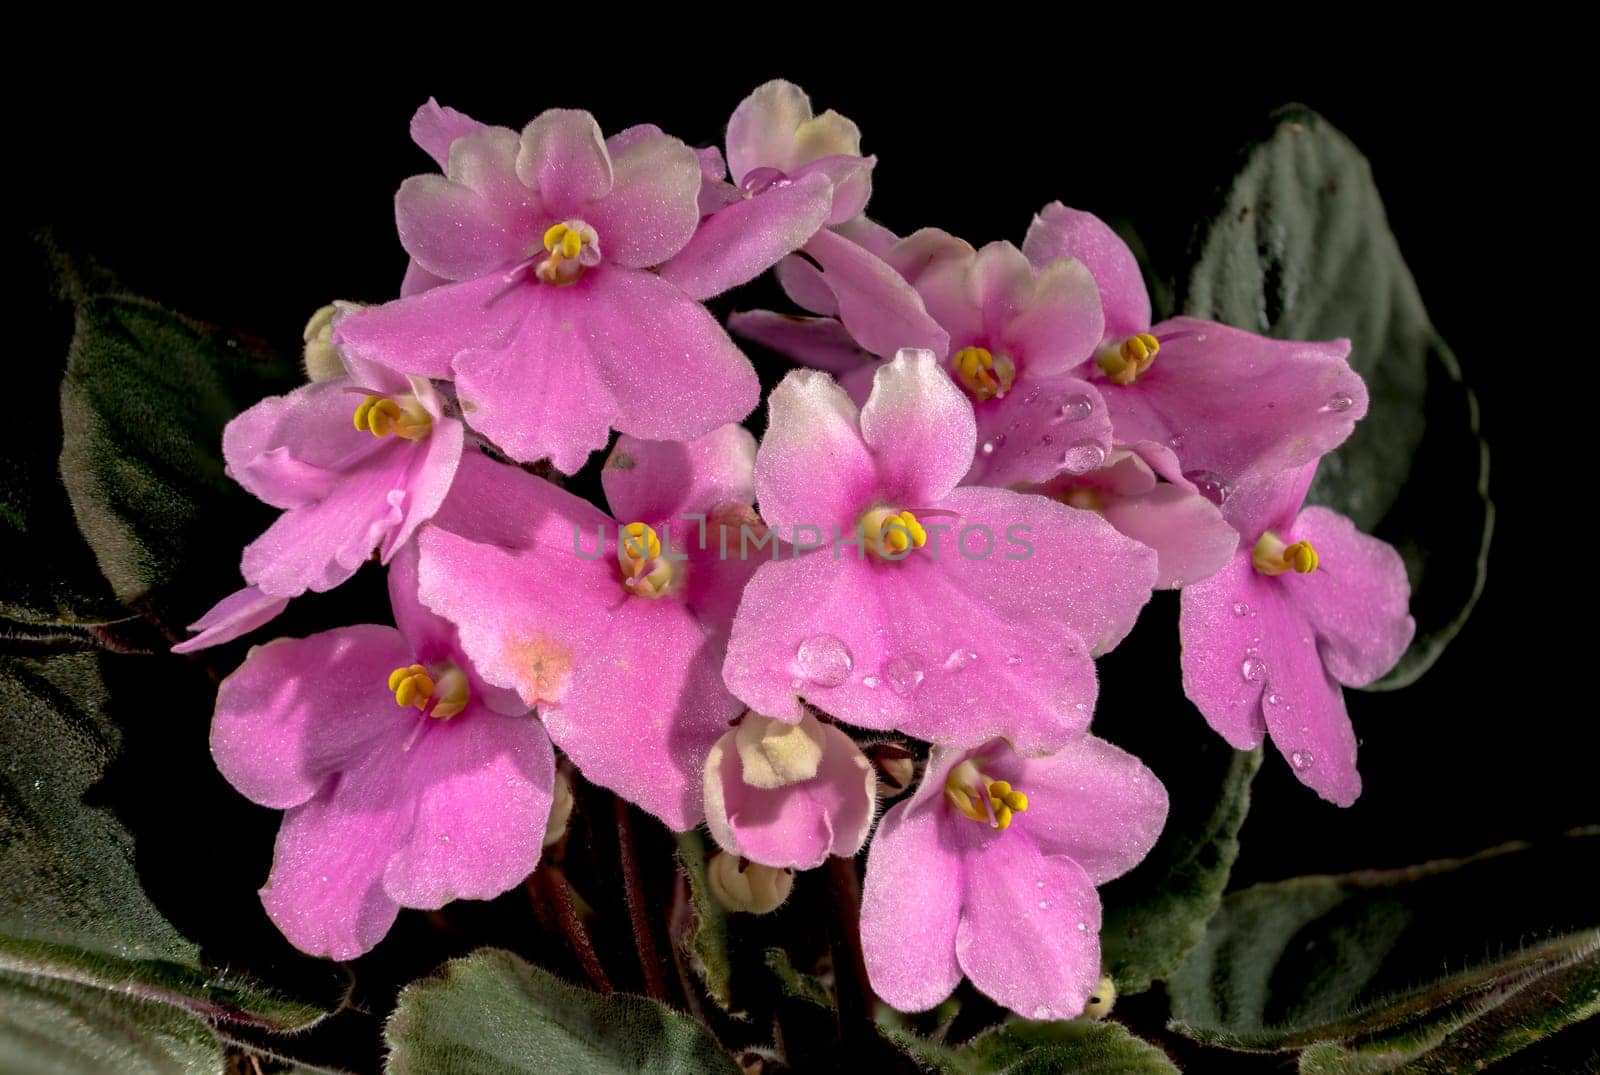 Pink Viola flowers on a black background by Multipedia